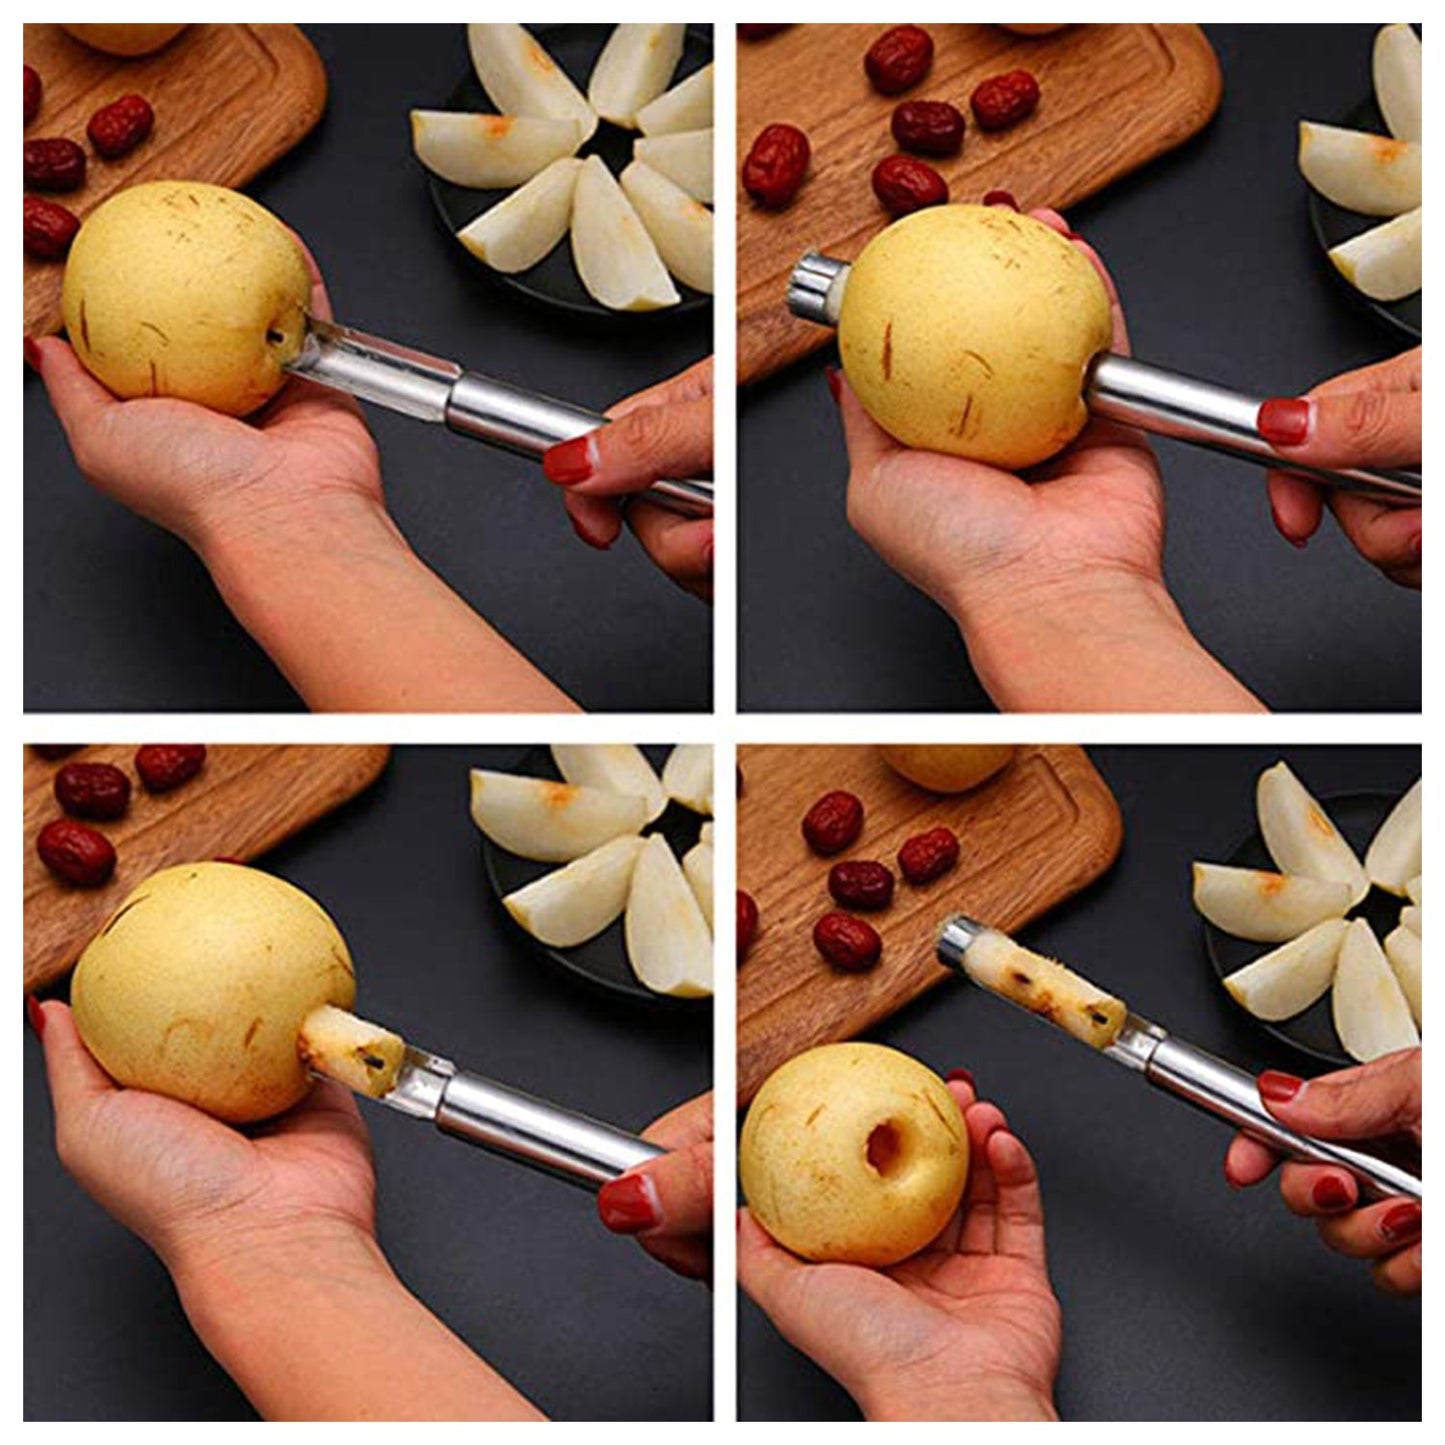 2187 Apple Corer Stainless Steel, Core Remover for Apple and Pear, Kitchen Gadget.